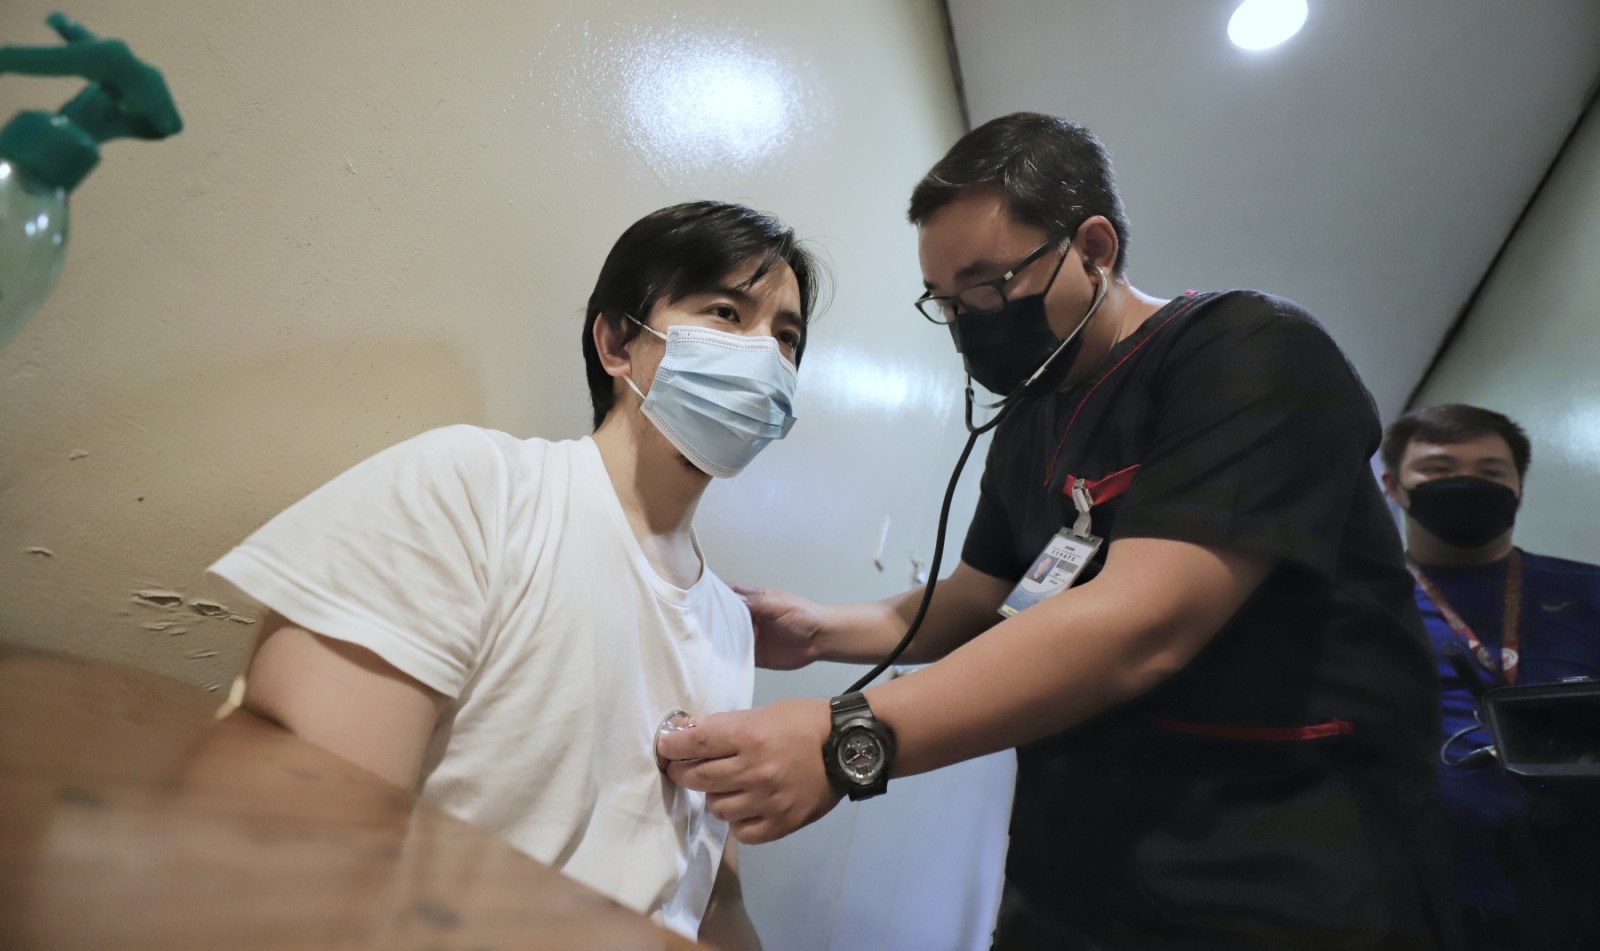 SENATE SENDS PHARMALLY EXECS TO PASAY JAIL: Pharmally Pharmaceutical Corporation executives Linconn Ong and Mohit Dargani undergo medical check-up, including an antigen test for COVID-19, in the Senate before they are transferred to the Pasay City Jail Monday, November 29, 2021. The Senate Blue Ribbon Committee ordered the transfer of the two Pharmally executives to the Pasay City Jail after they failed to provide the documents needed by the panel for its probe on the alleged anomalies in the purchase of personal protective equipment and other medical supplies related to the fight against COVID-19. In the commitment order signed Saturday, November 27, by Senate President Vicente Sotto III and Sen. Richard Gordon, Blue Ribbon Committee chairman, Ong and Dargani would remain in jail "until such time that they will properly answer questions propounded to them, submit documents required by the committee or otherwise purge themselves of a contempt order imposed against them." (Joseph Vidal/Senate PRIB)